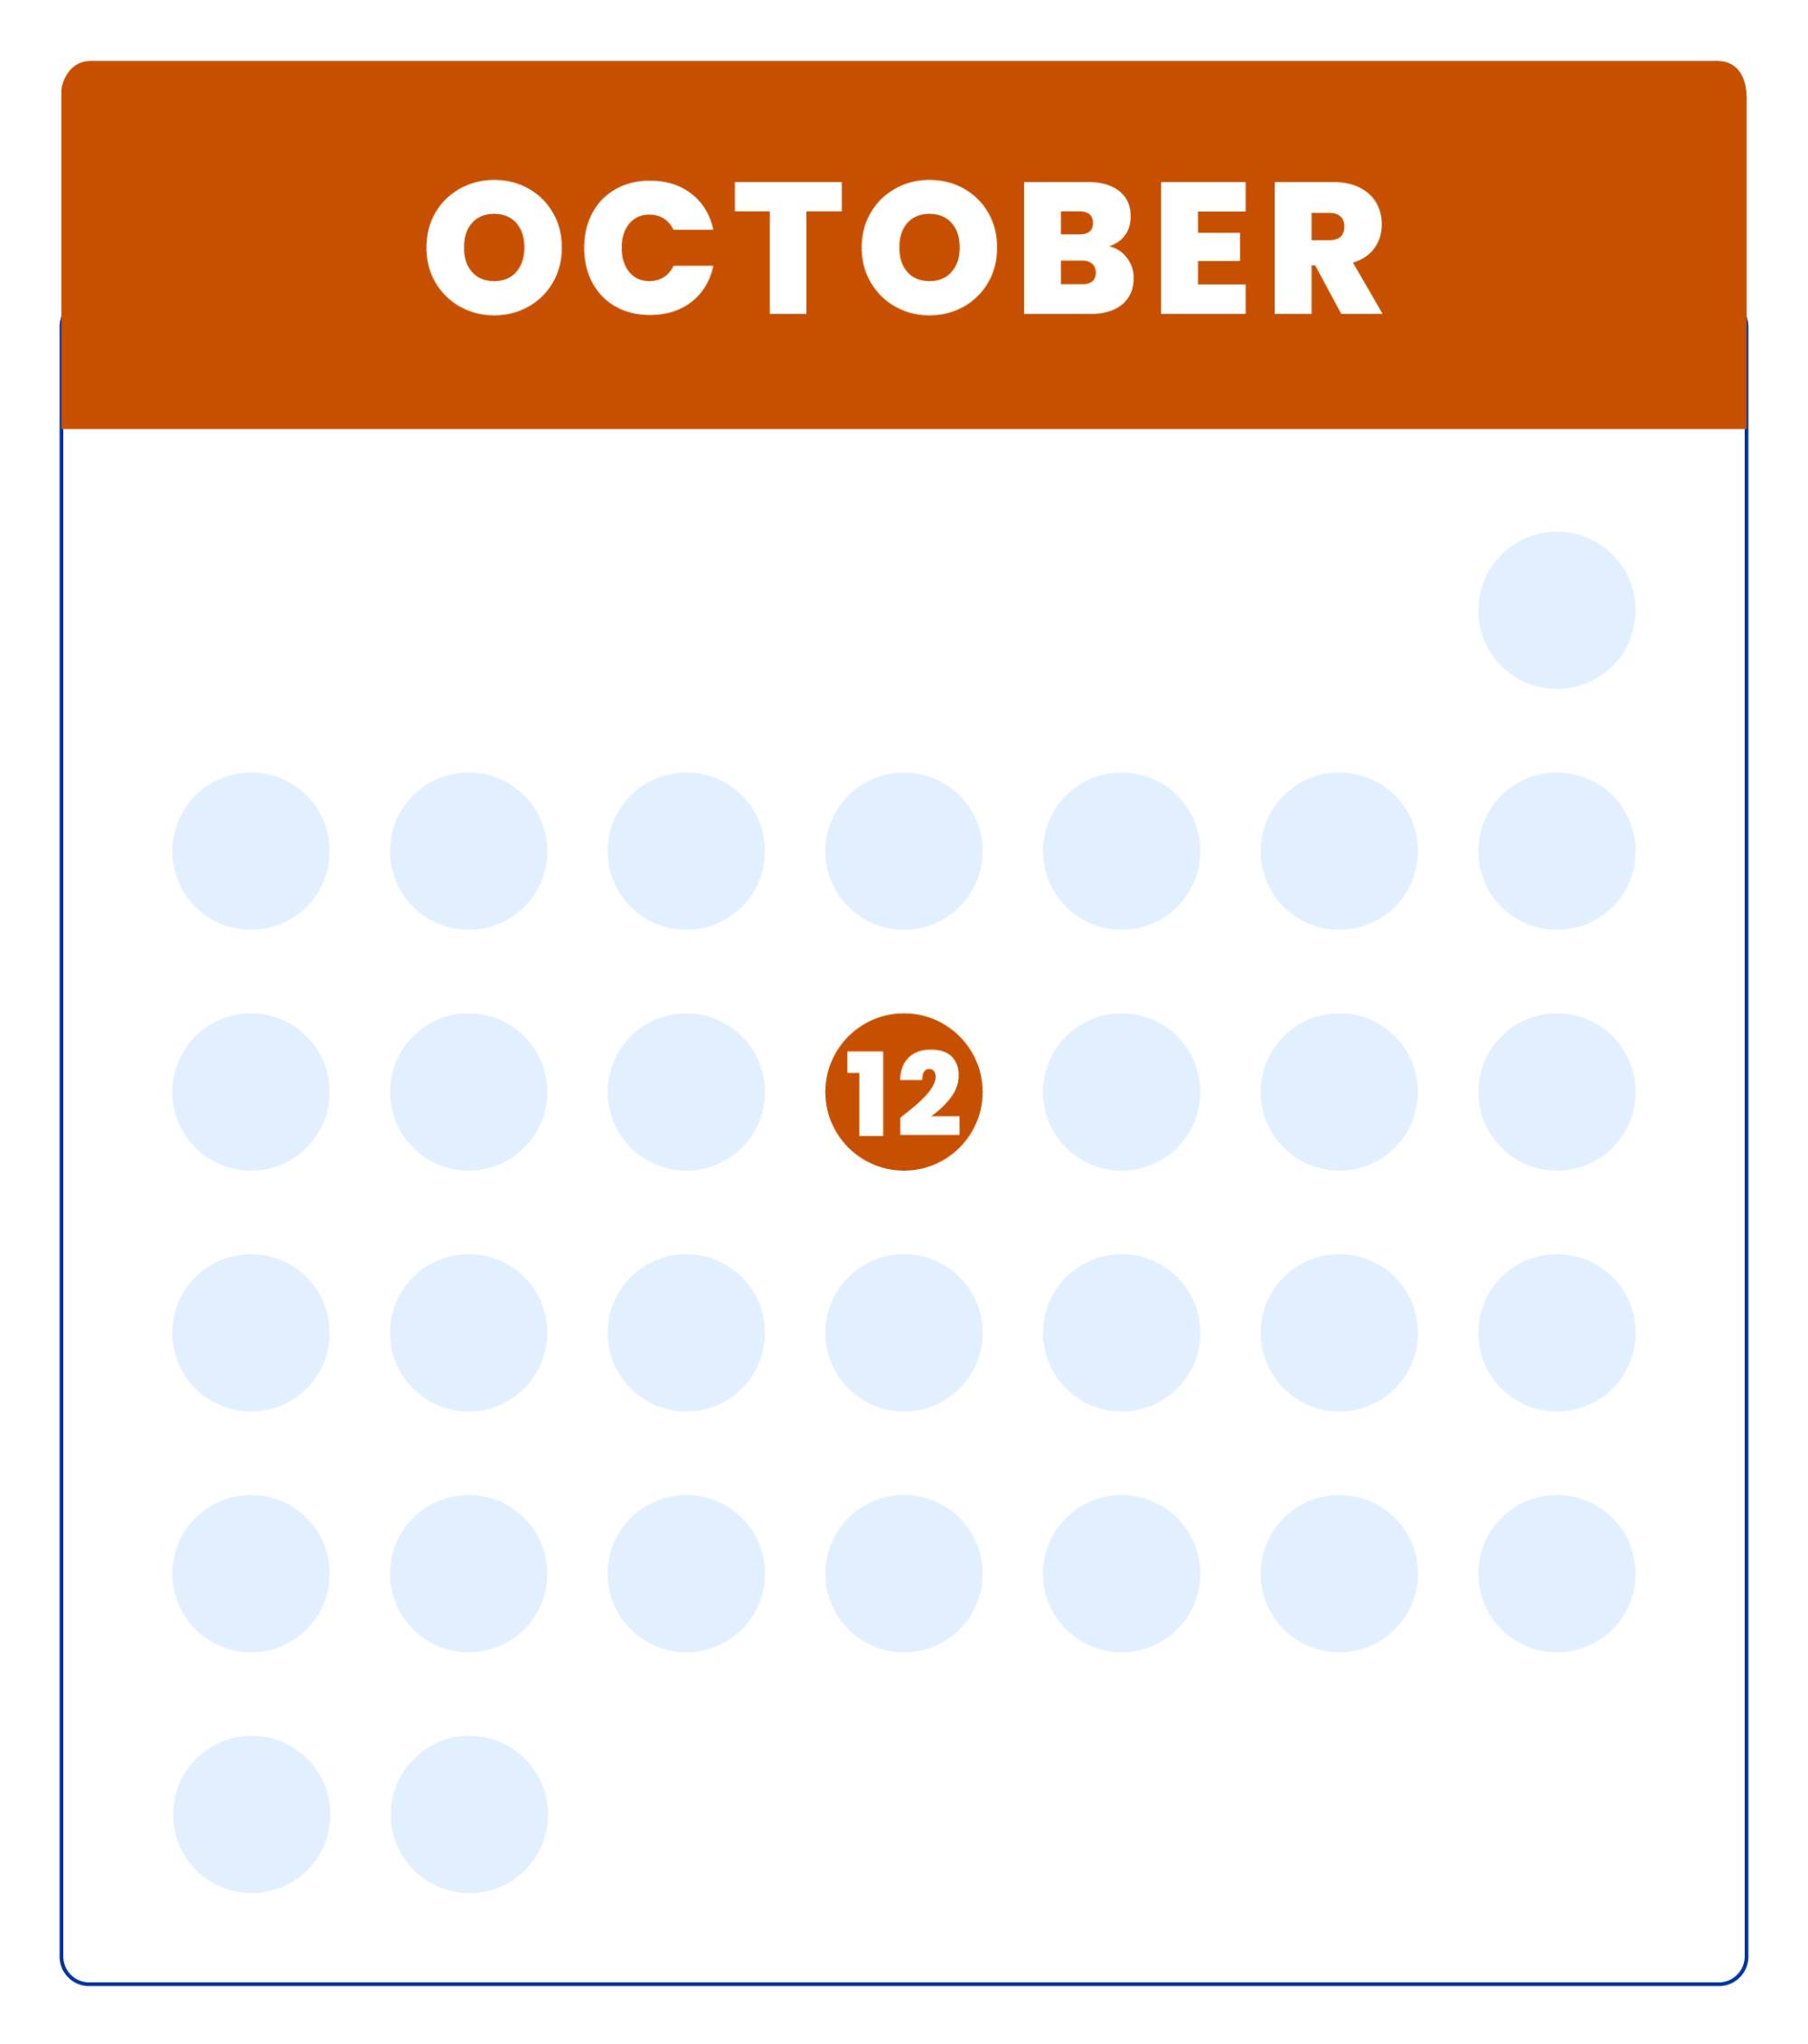 Calendar graphic with October 12, 2022 highlighted